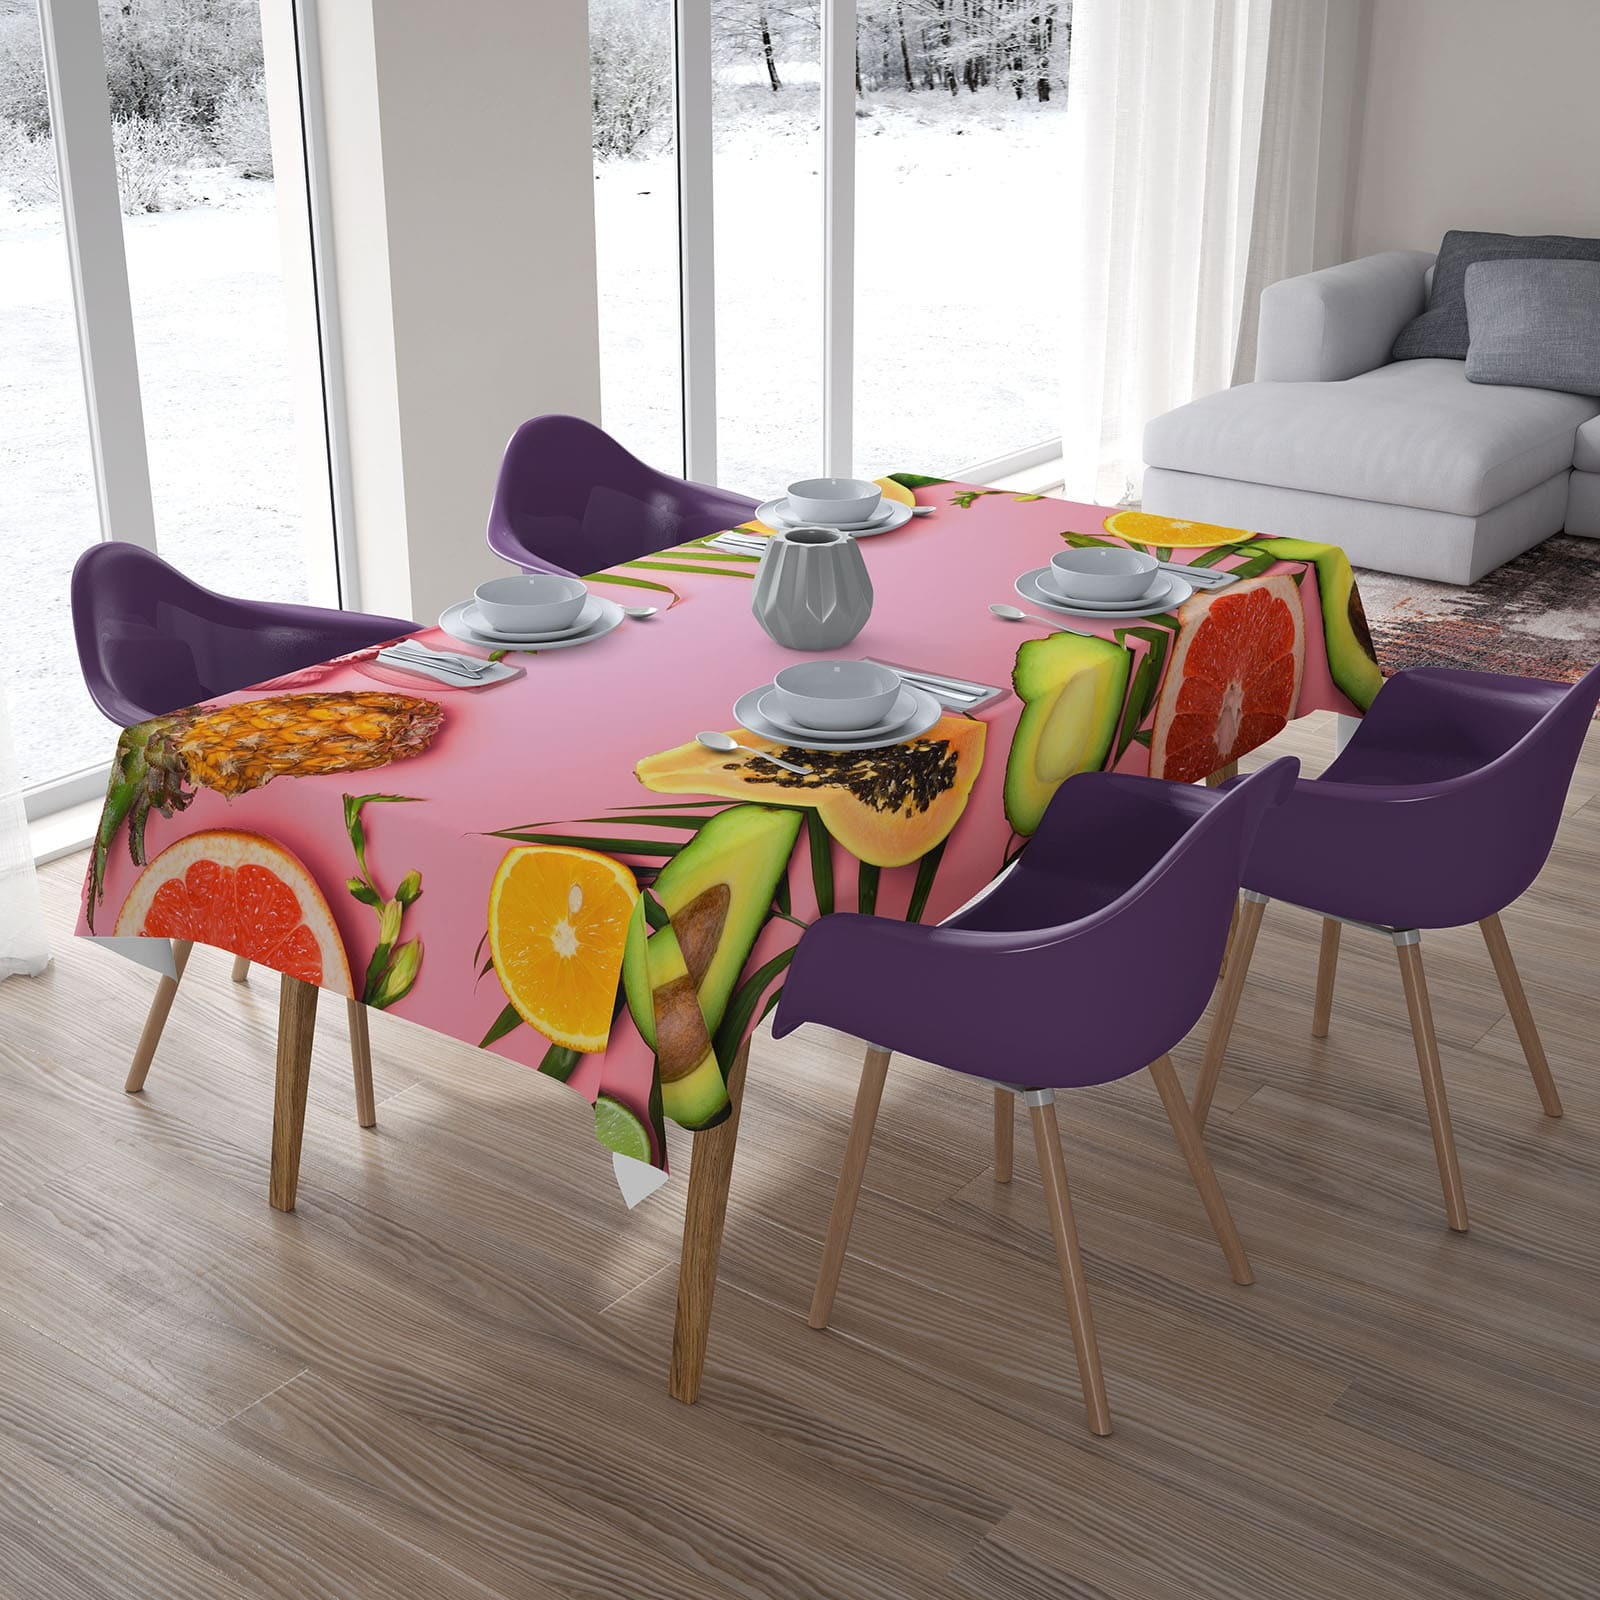 tablecloths - with fruit and animals